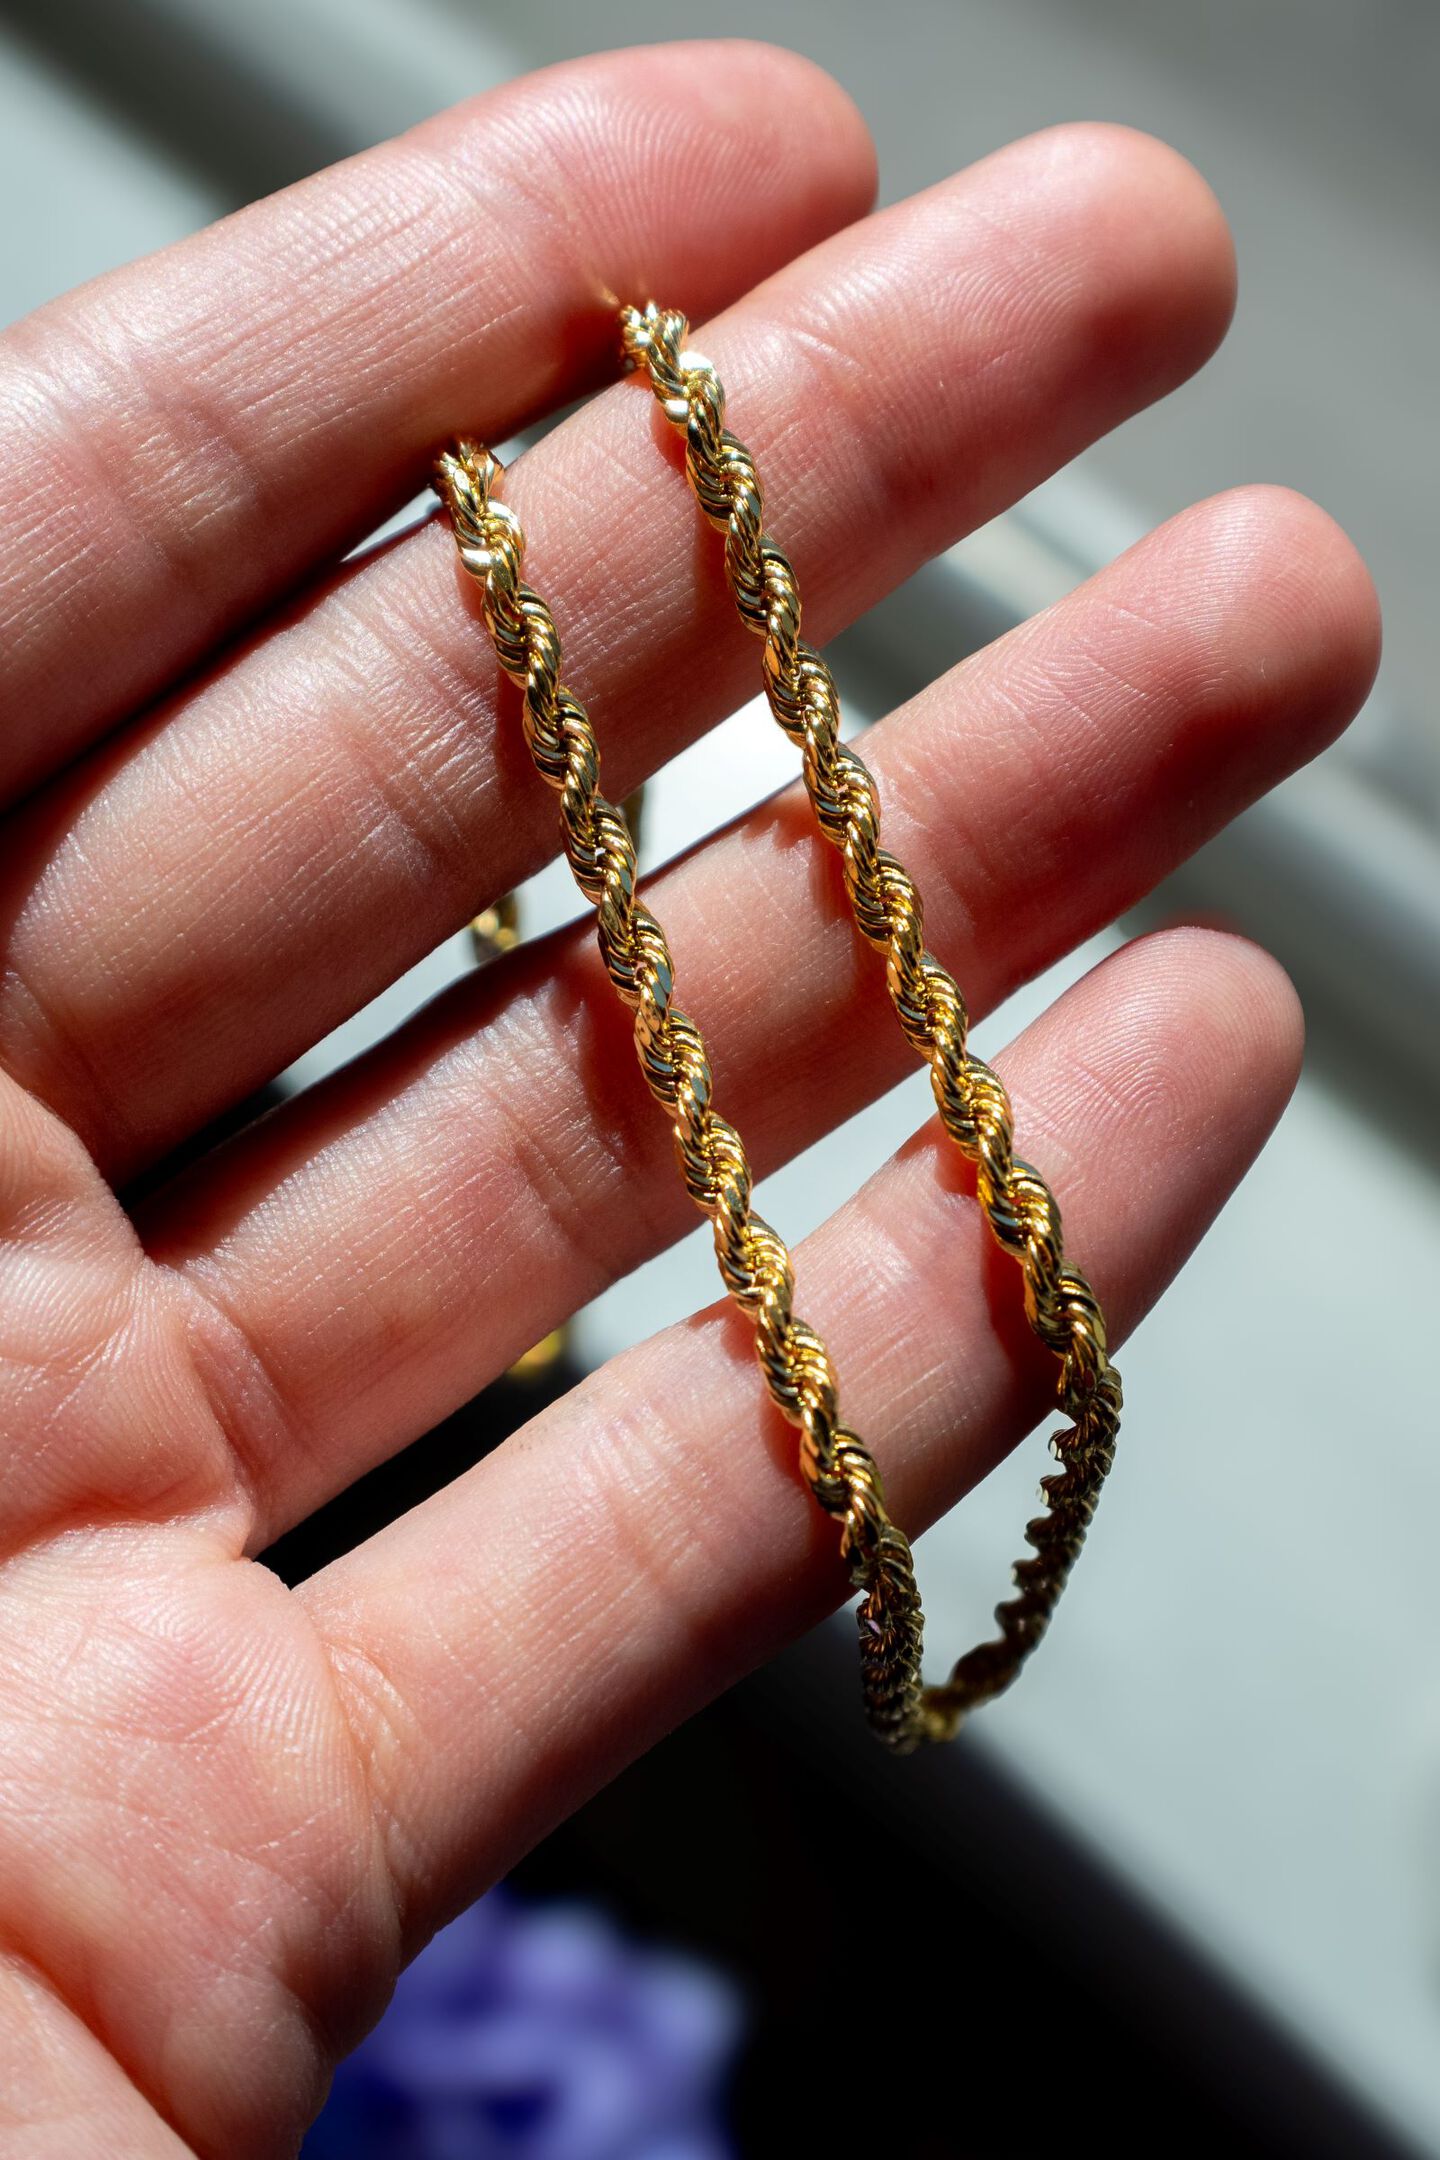 Yellow gold rope chain shines in the palm of someone's hand